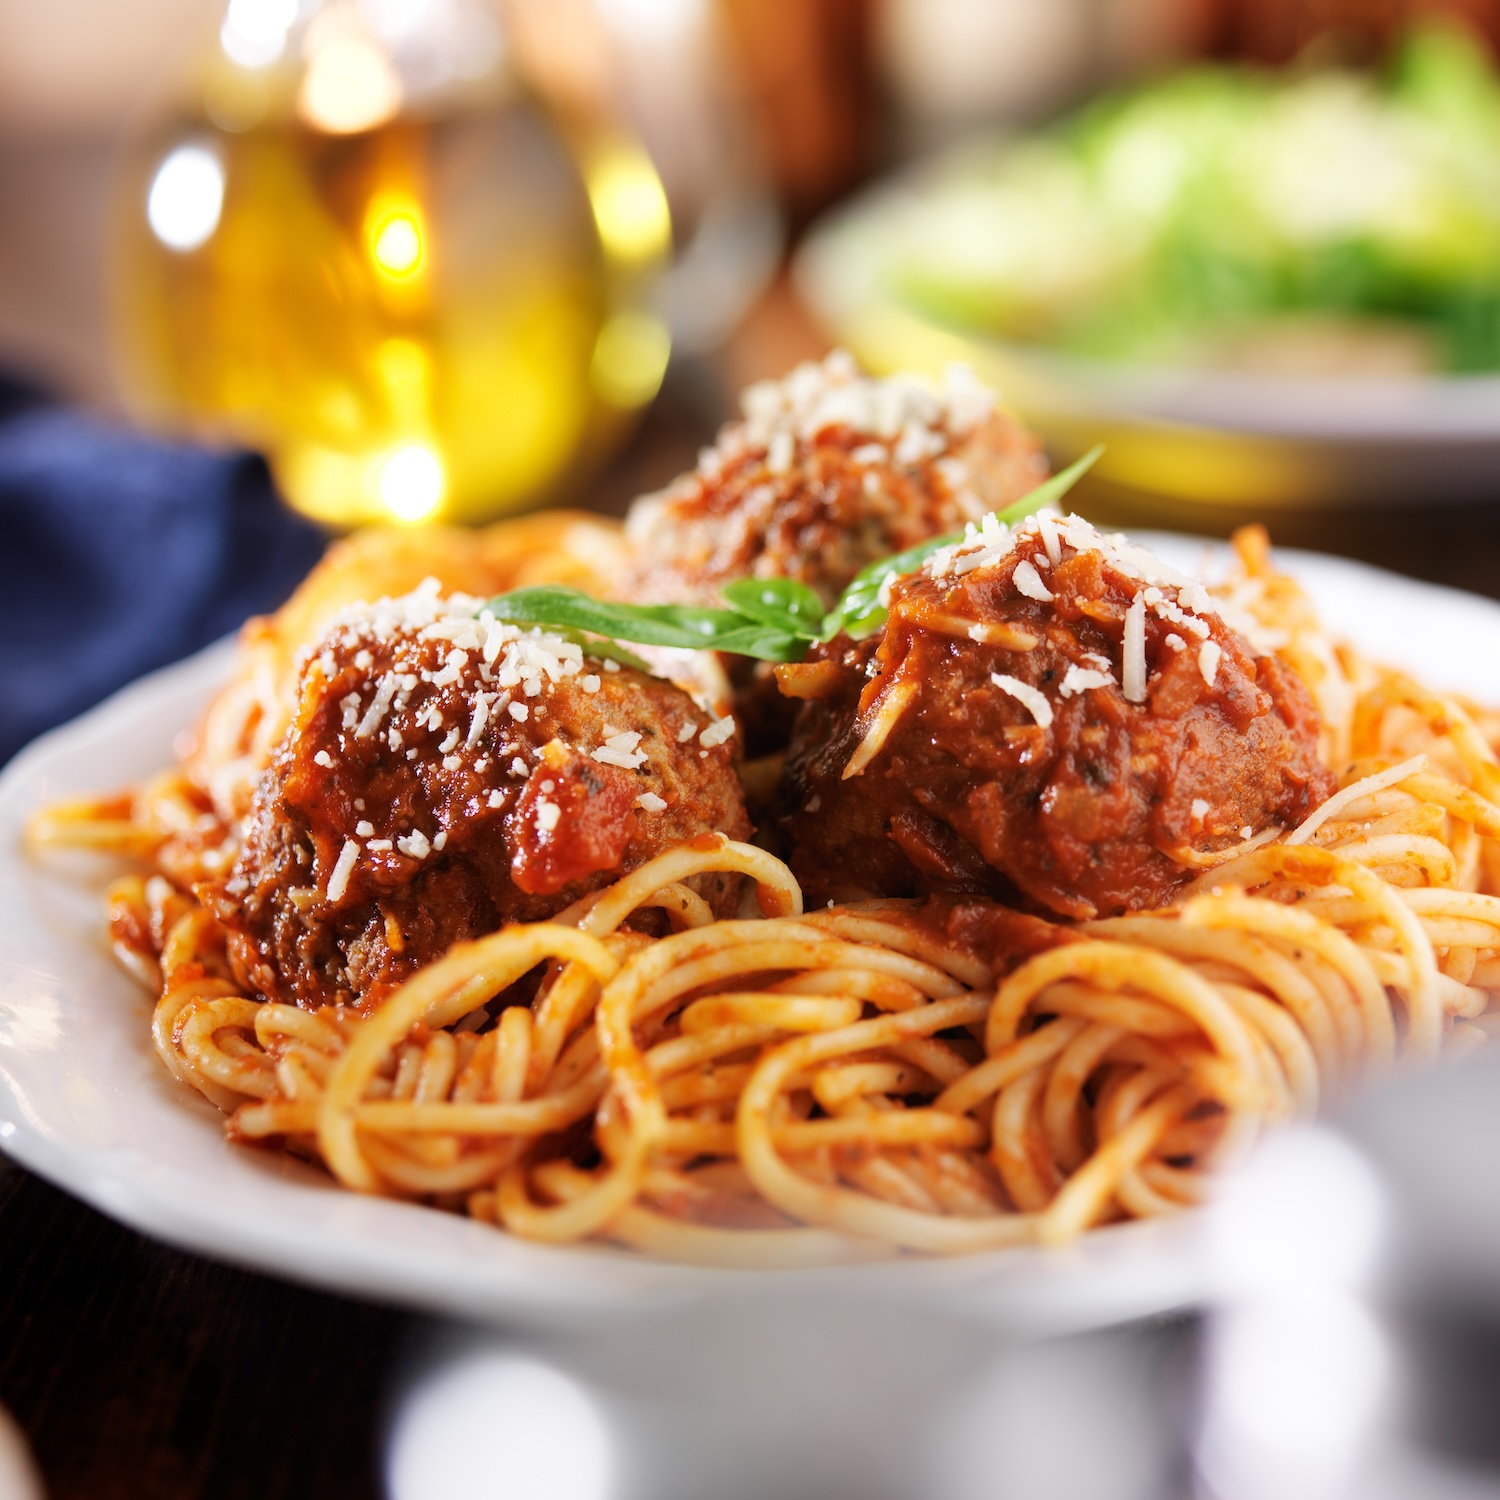 Italian spaghetti and meatballs with salad in background 